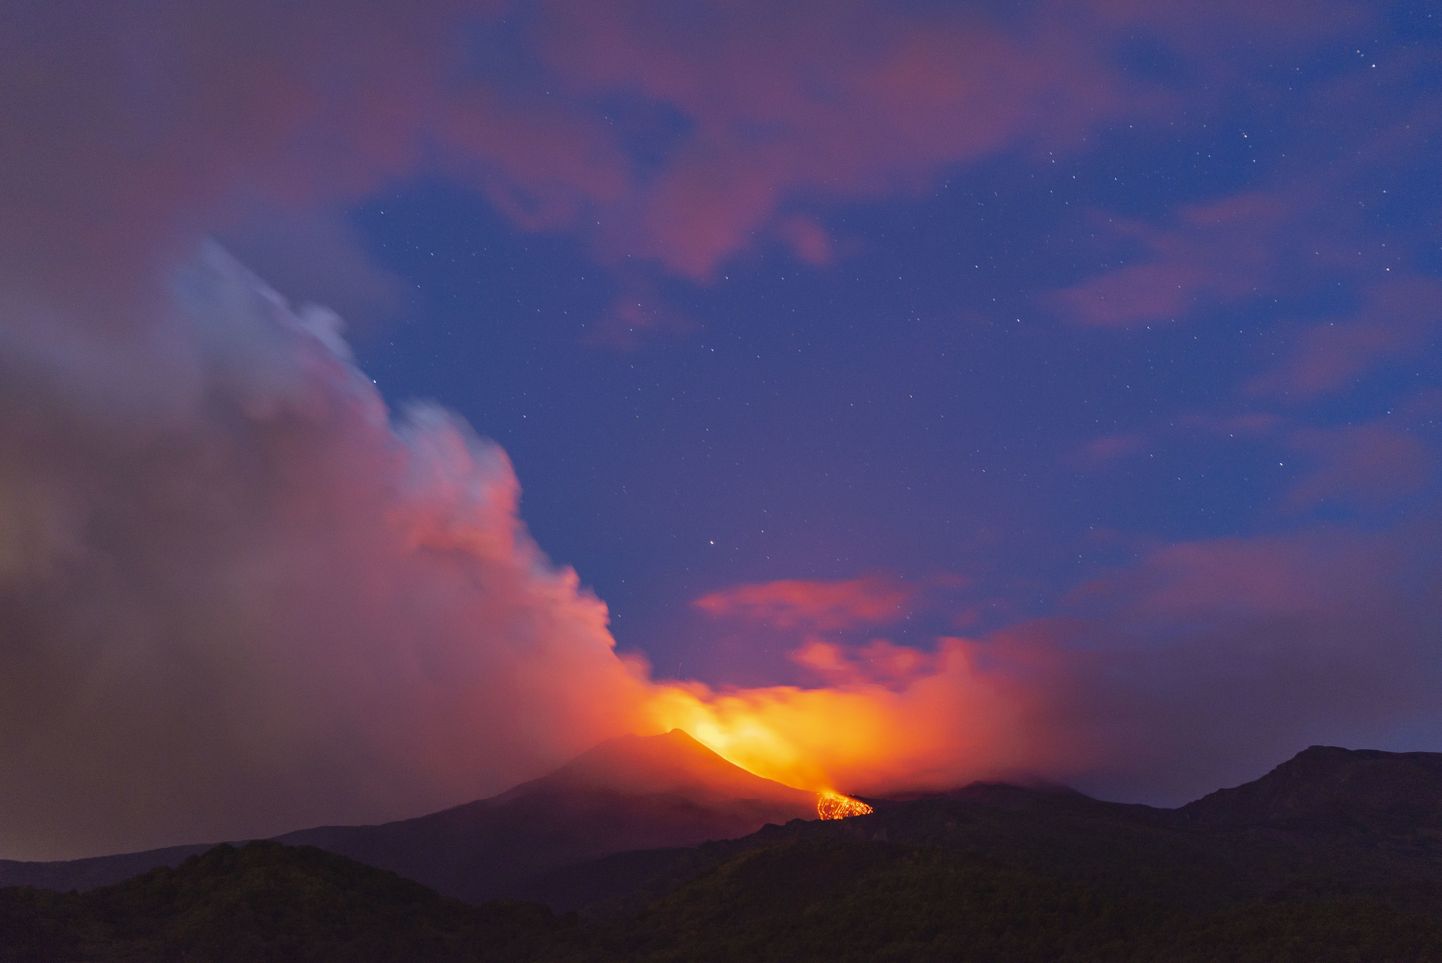 Mount Etna volcano spews lava during an eruption early Saturday, Aug. 25, 2018. Mount Etna in Sicily has roared back into spectacular volcanic action, sending up plumes of ash and spewing lava. Italy's National Institute of Geophysics and Vulcanology (INGV) says that the volcano, which initially "re-awoke" in late July, sprang into fuller action Thursday evening by shooting up chunks of flaming lava as high as 150 meters (500 feet) almost constantly. (AP Photo/Salvatore Allegra)